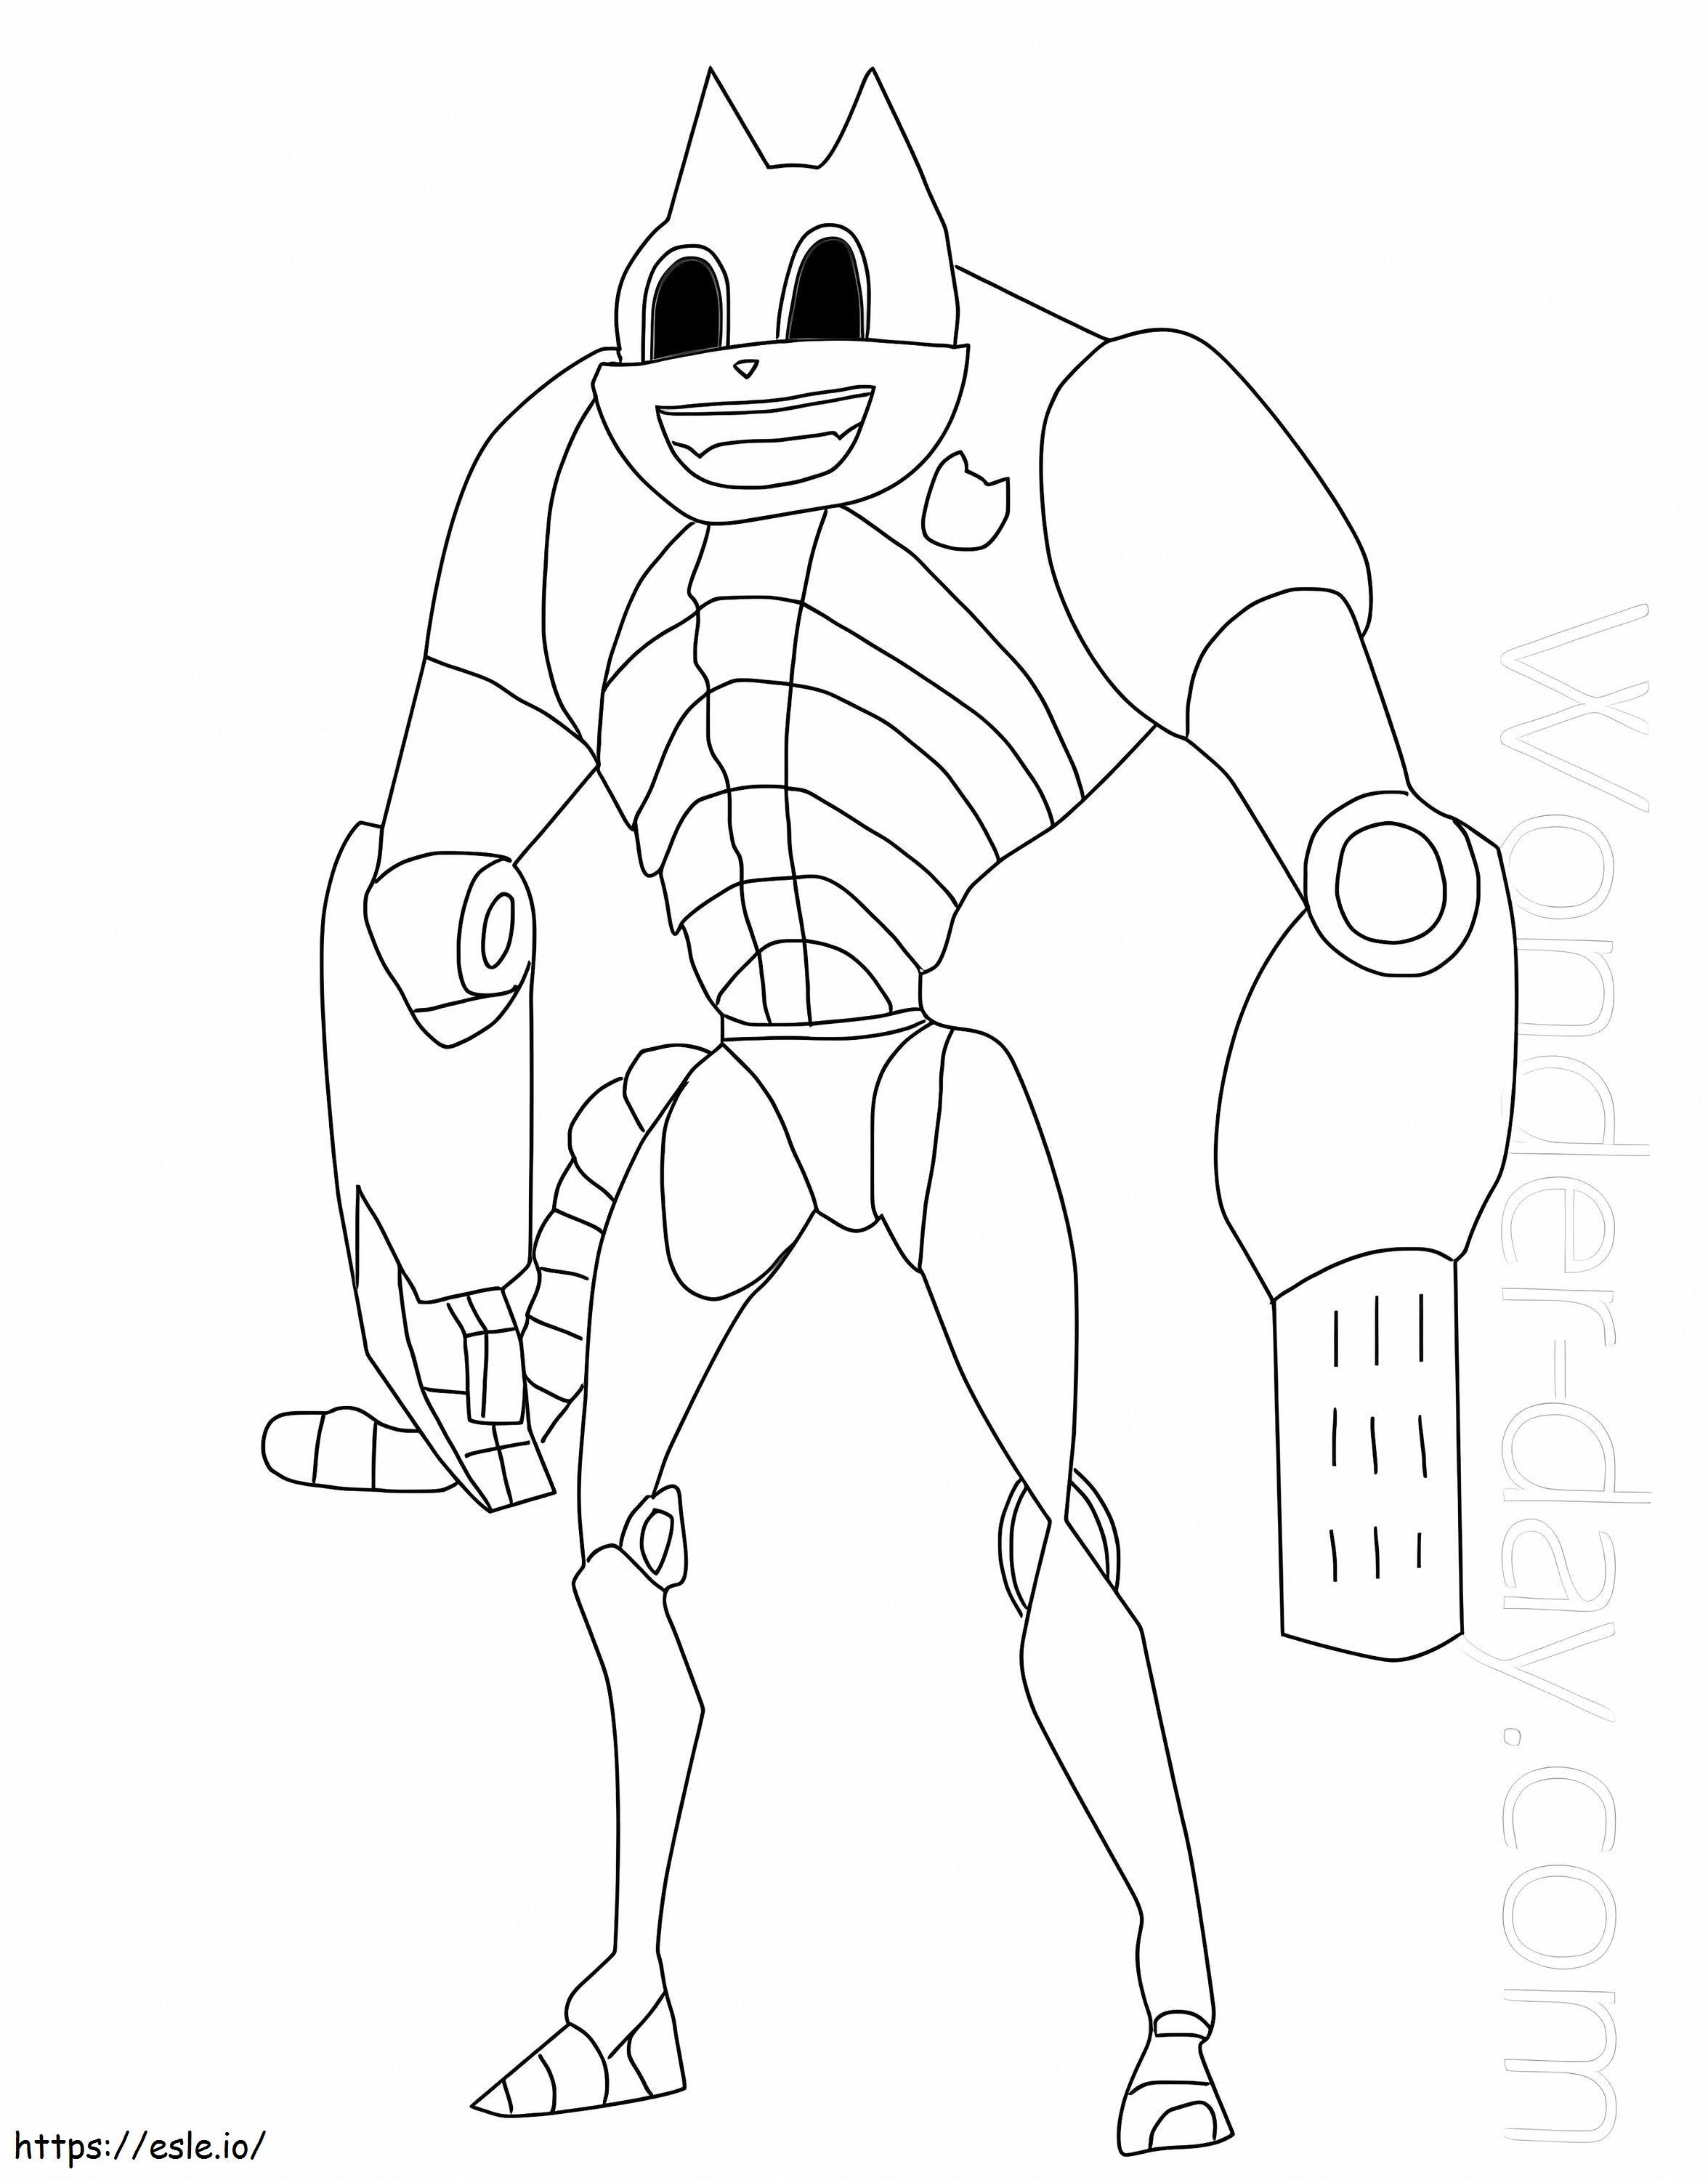 Cyber Cartoon Cat coloring page